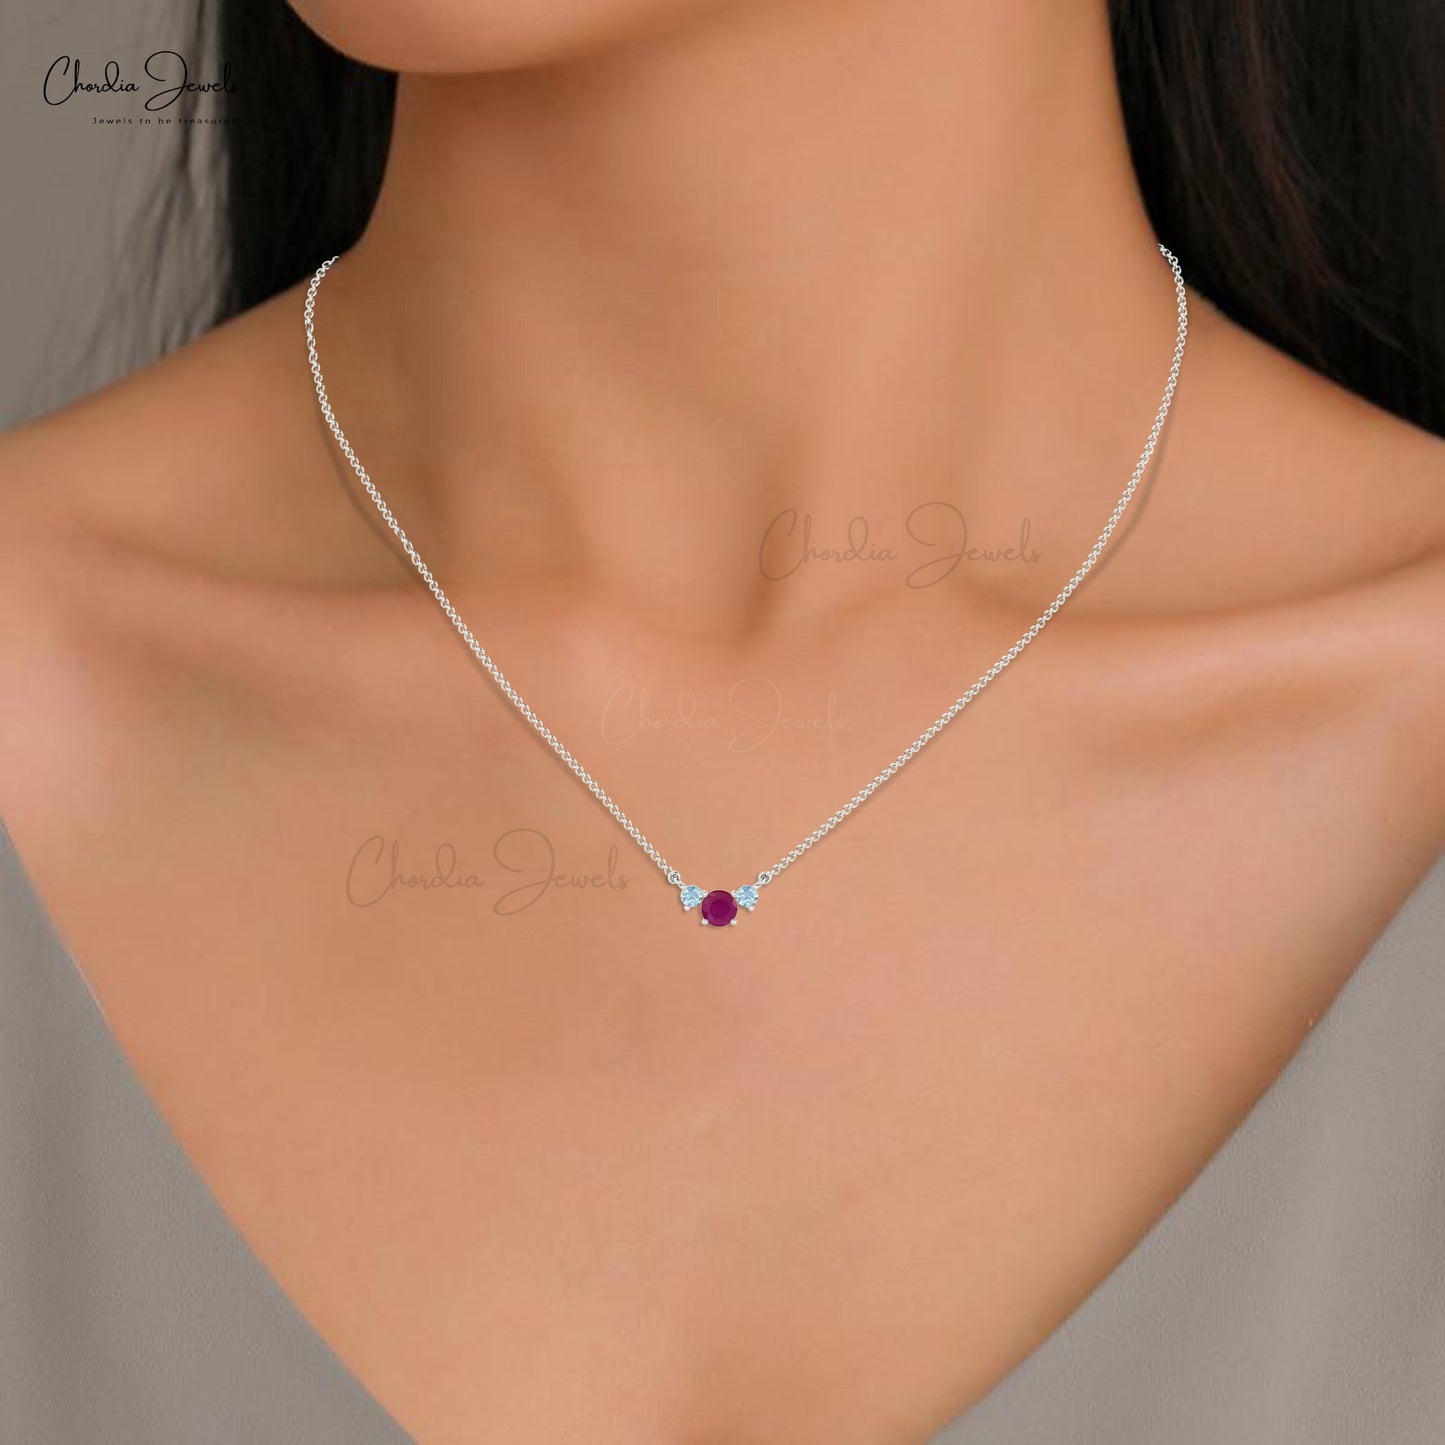 Load image into Gallery viewer, Classic July Birthstone Ruby and Aquamarine 14K Gold Three Stone Necklace
